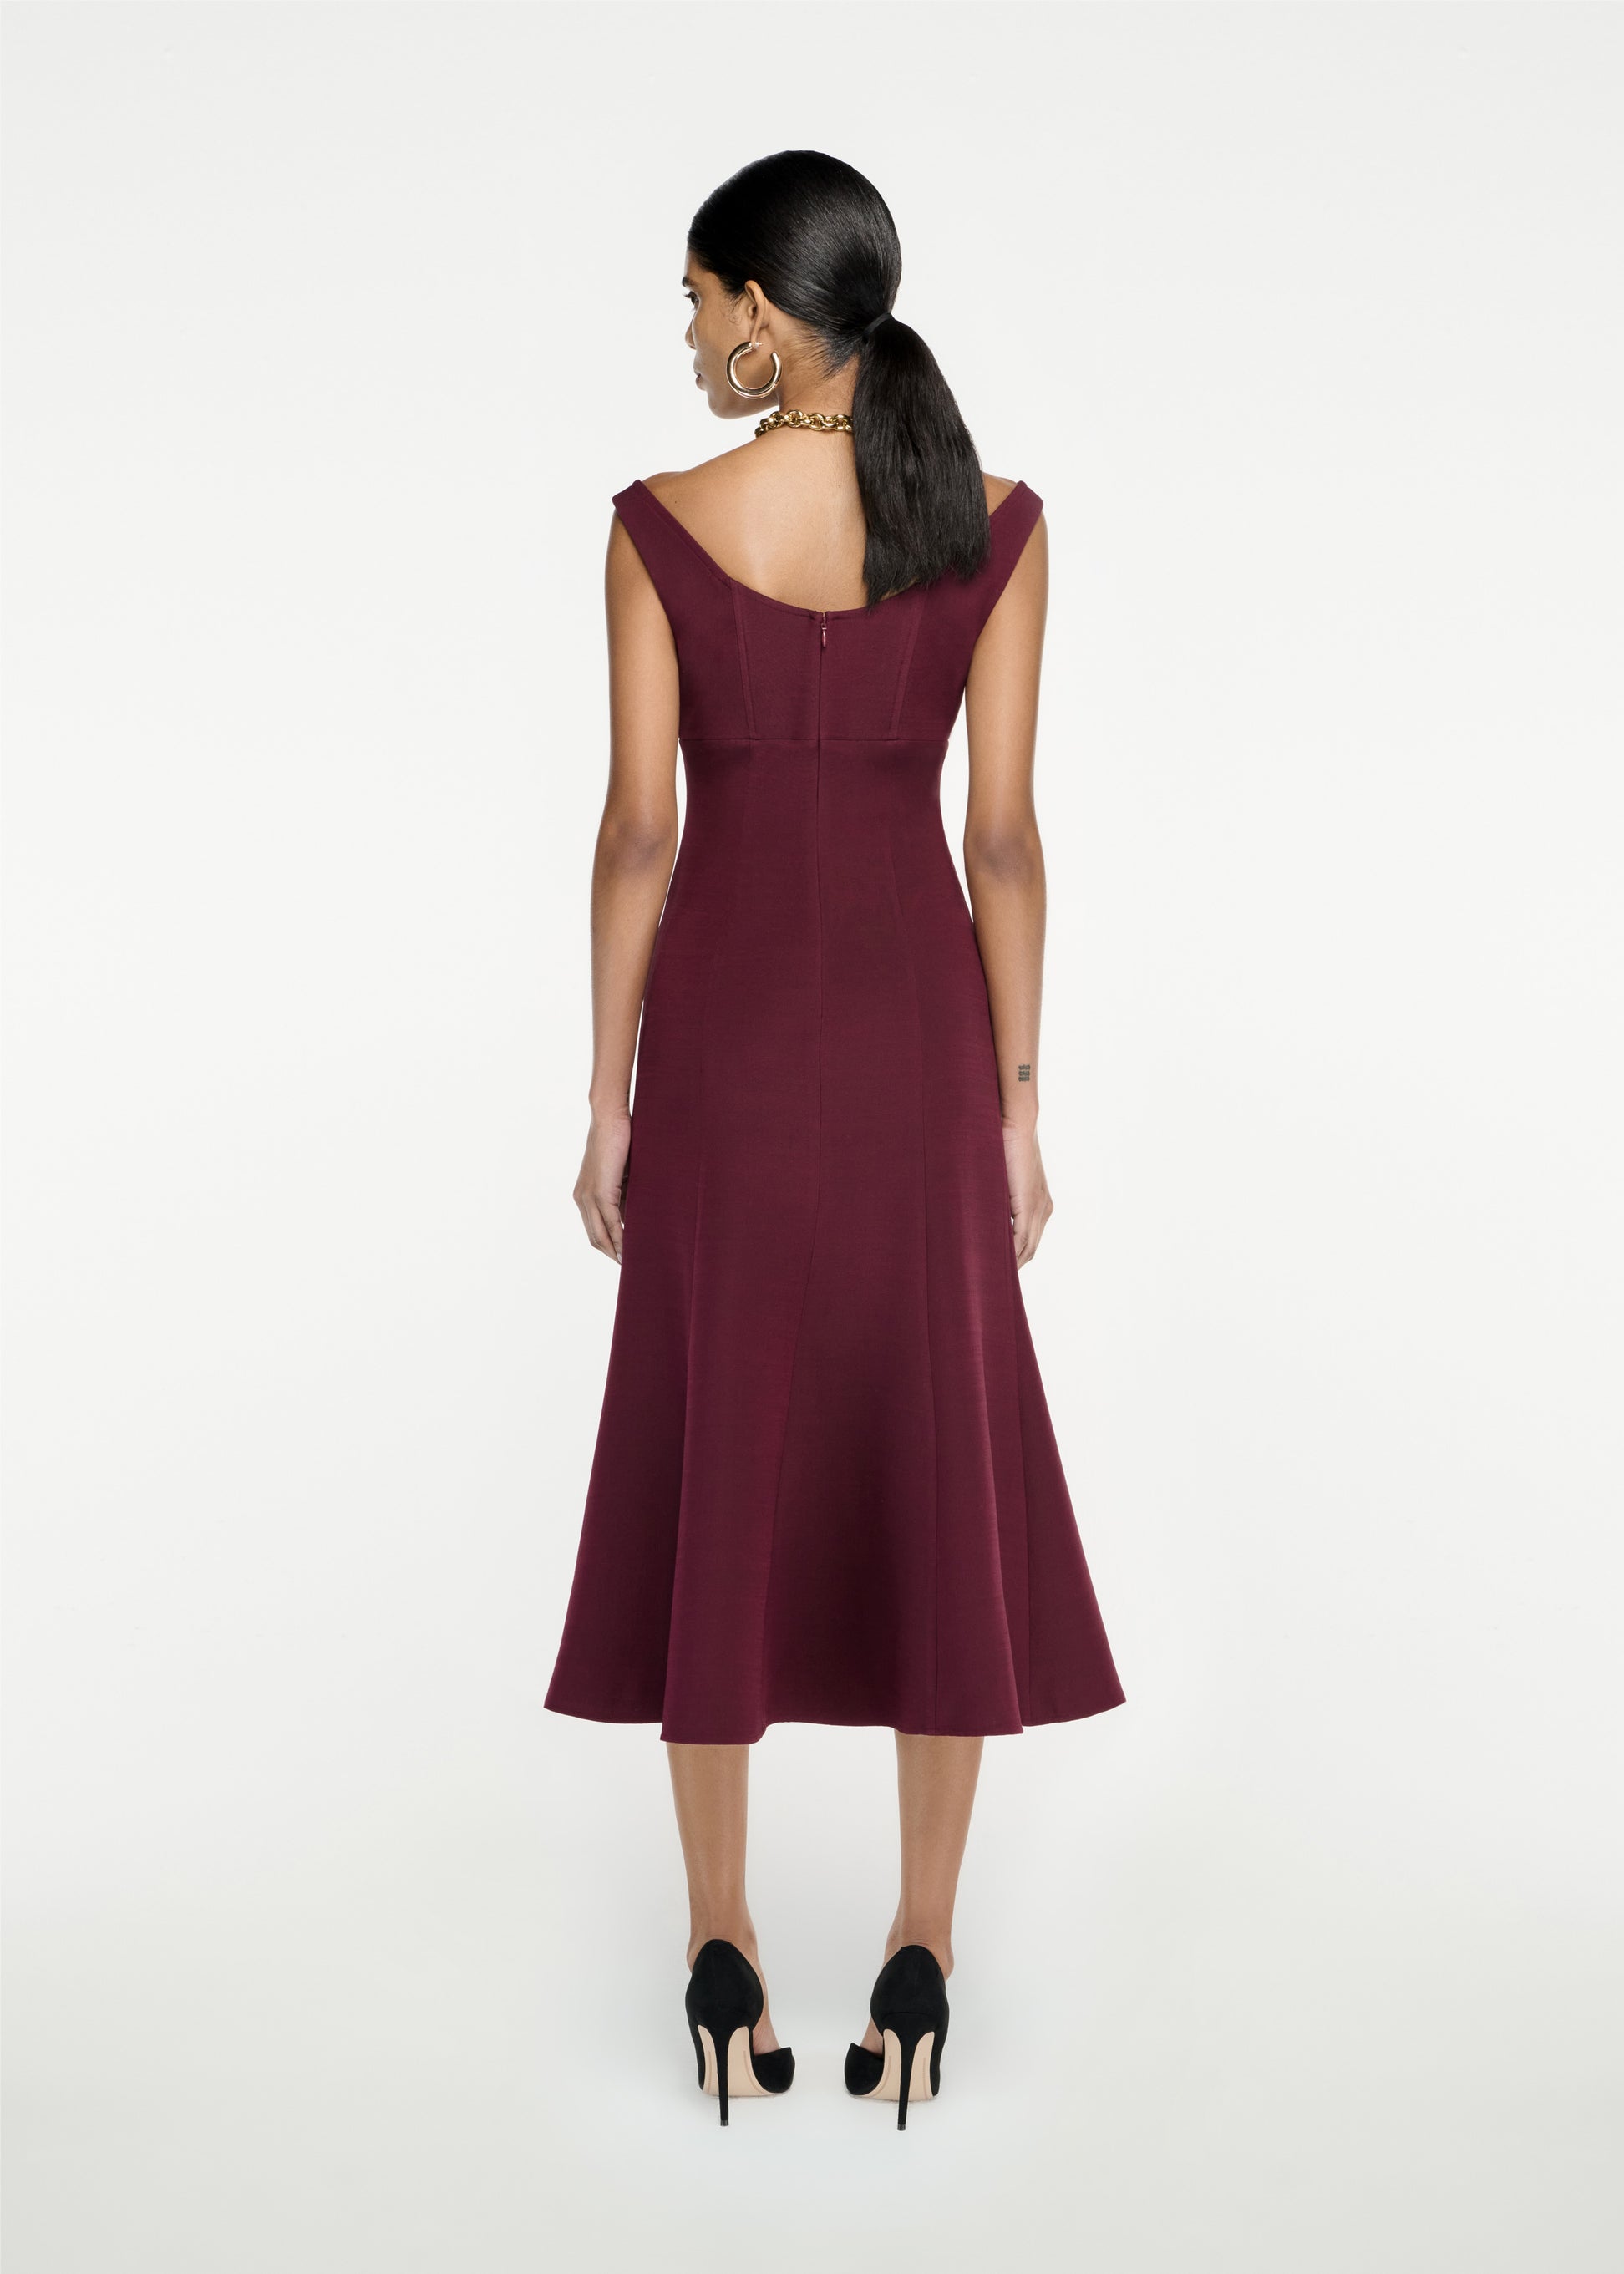 The back of a woman wearing the Off The Shoulder Silk Wool Midi Dress in Maroon